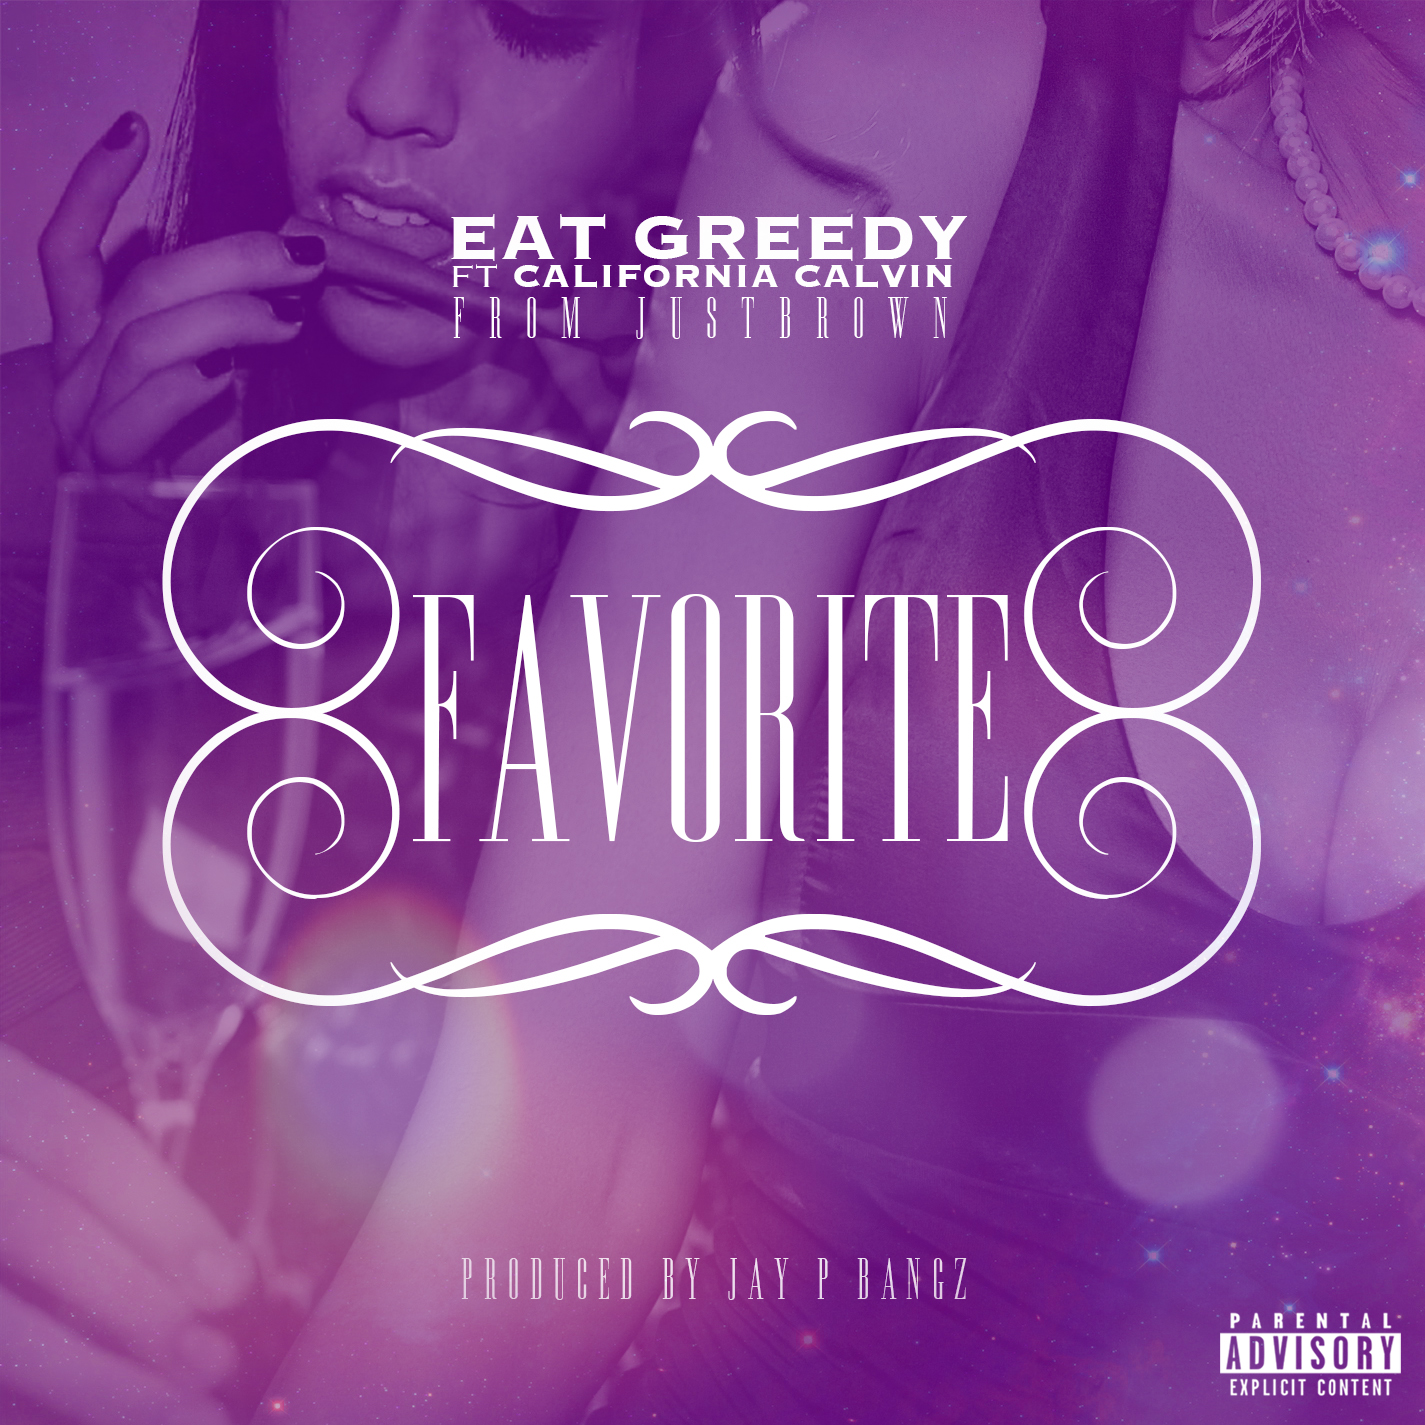 Eat Greedy featuring California Calvin from JustBrown - "Favorite"